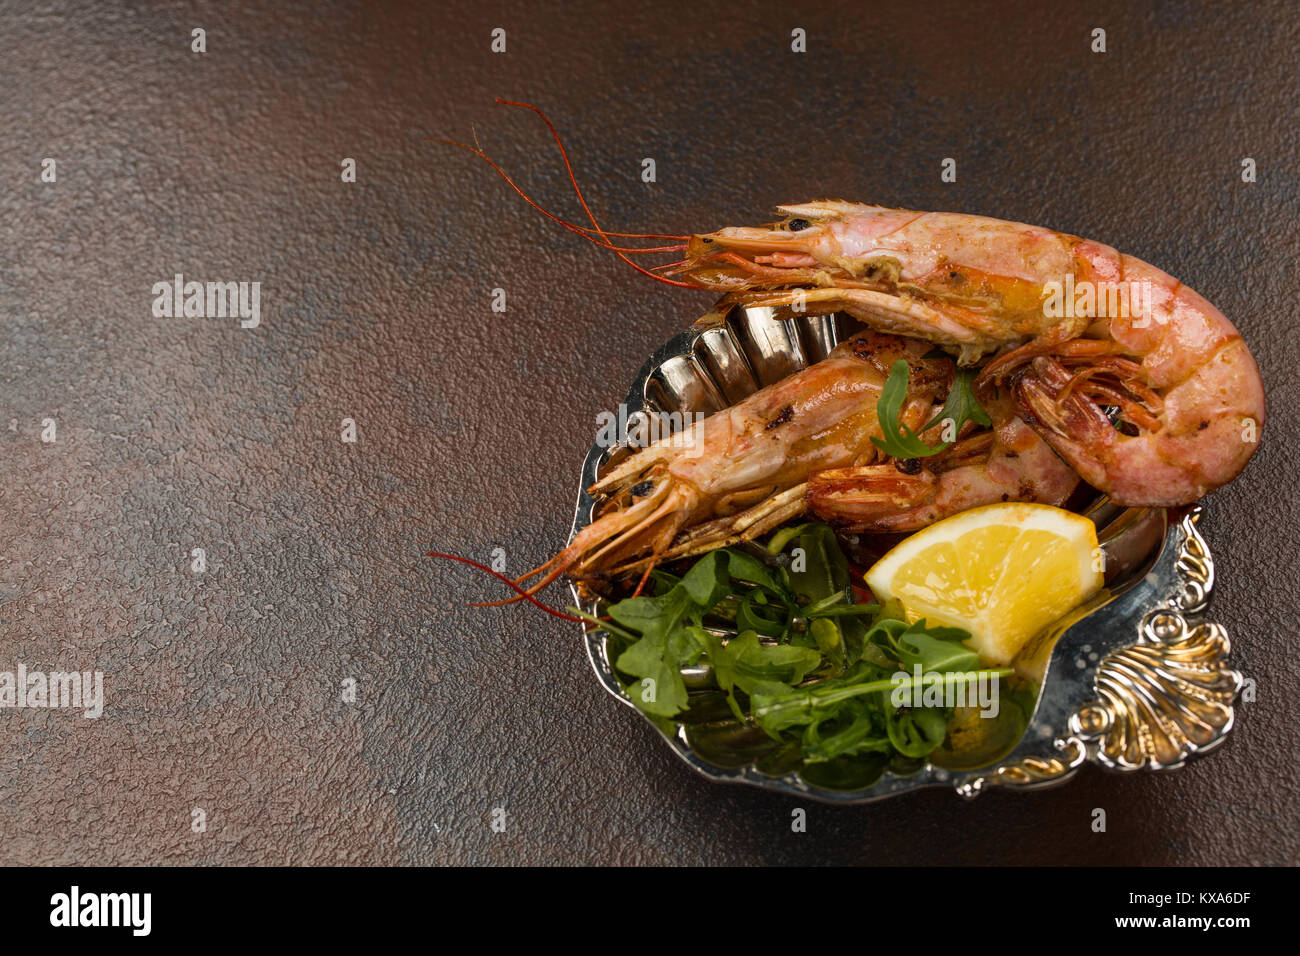 Two Fried Tiger Prawns or langostinos with greens and Lemon on ancient plate over dark background. Close-up view. Space for text Stock Photo